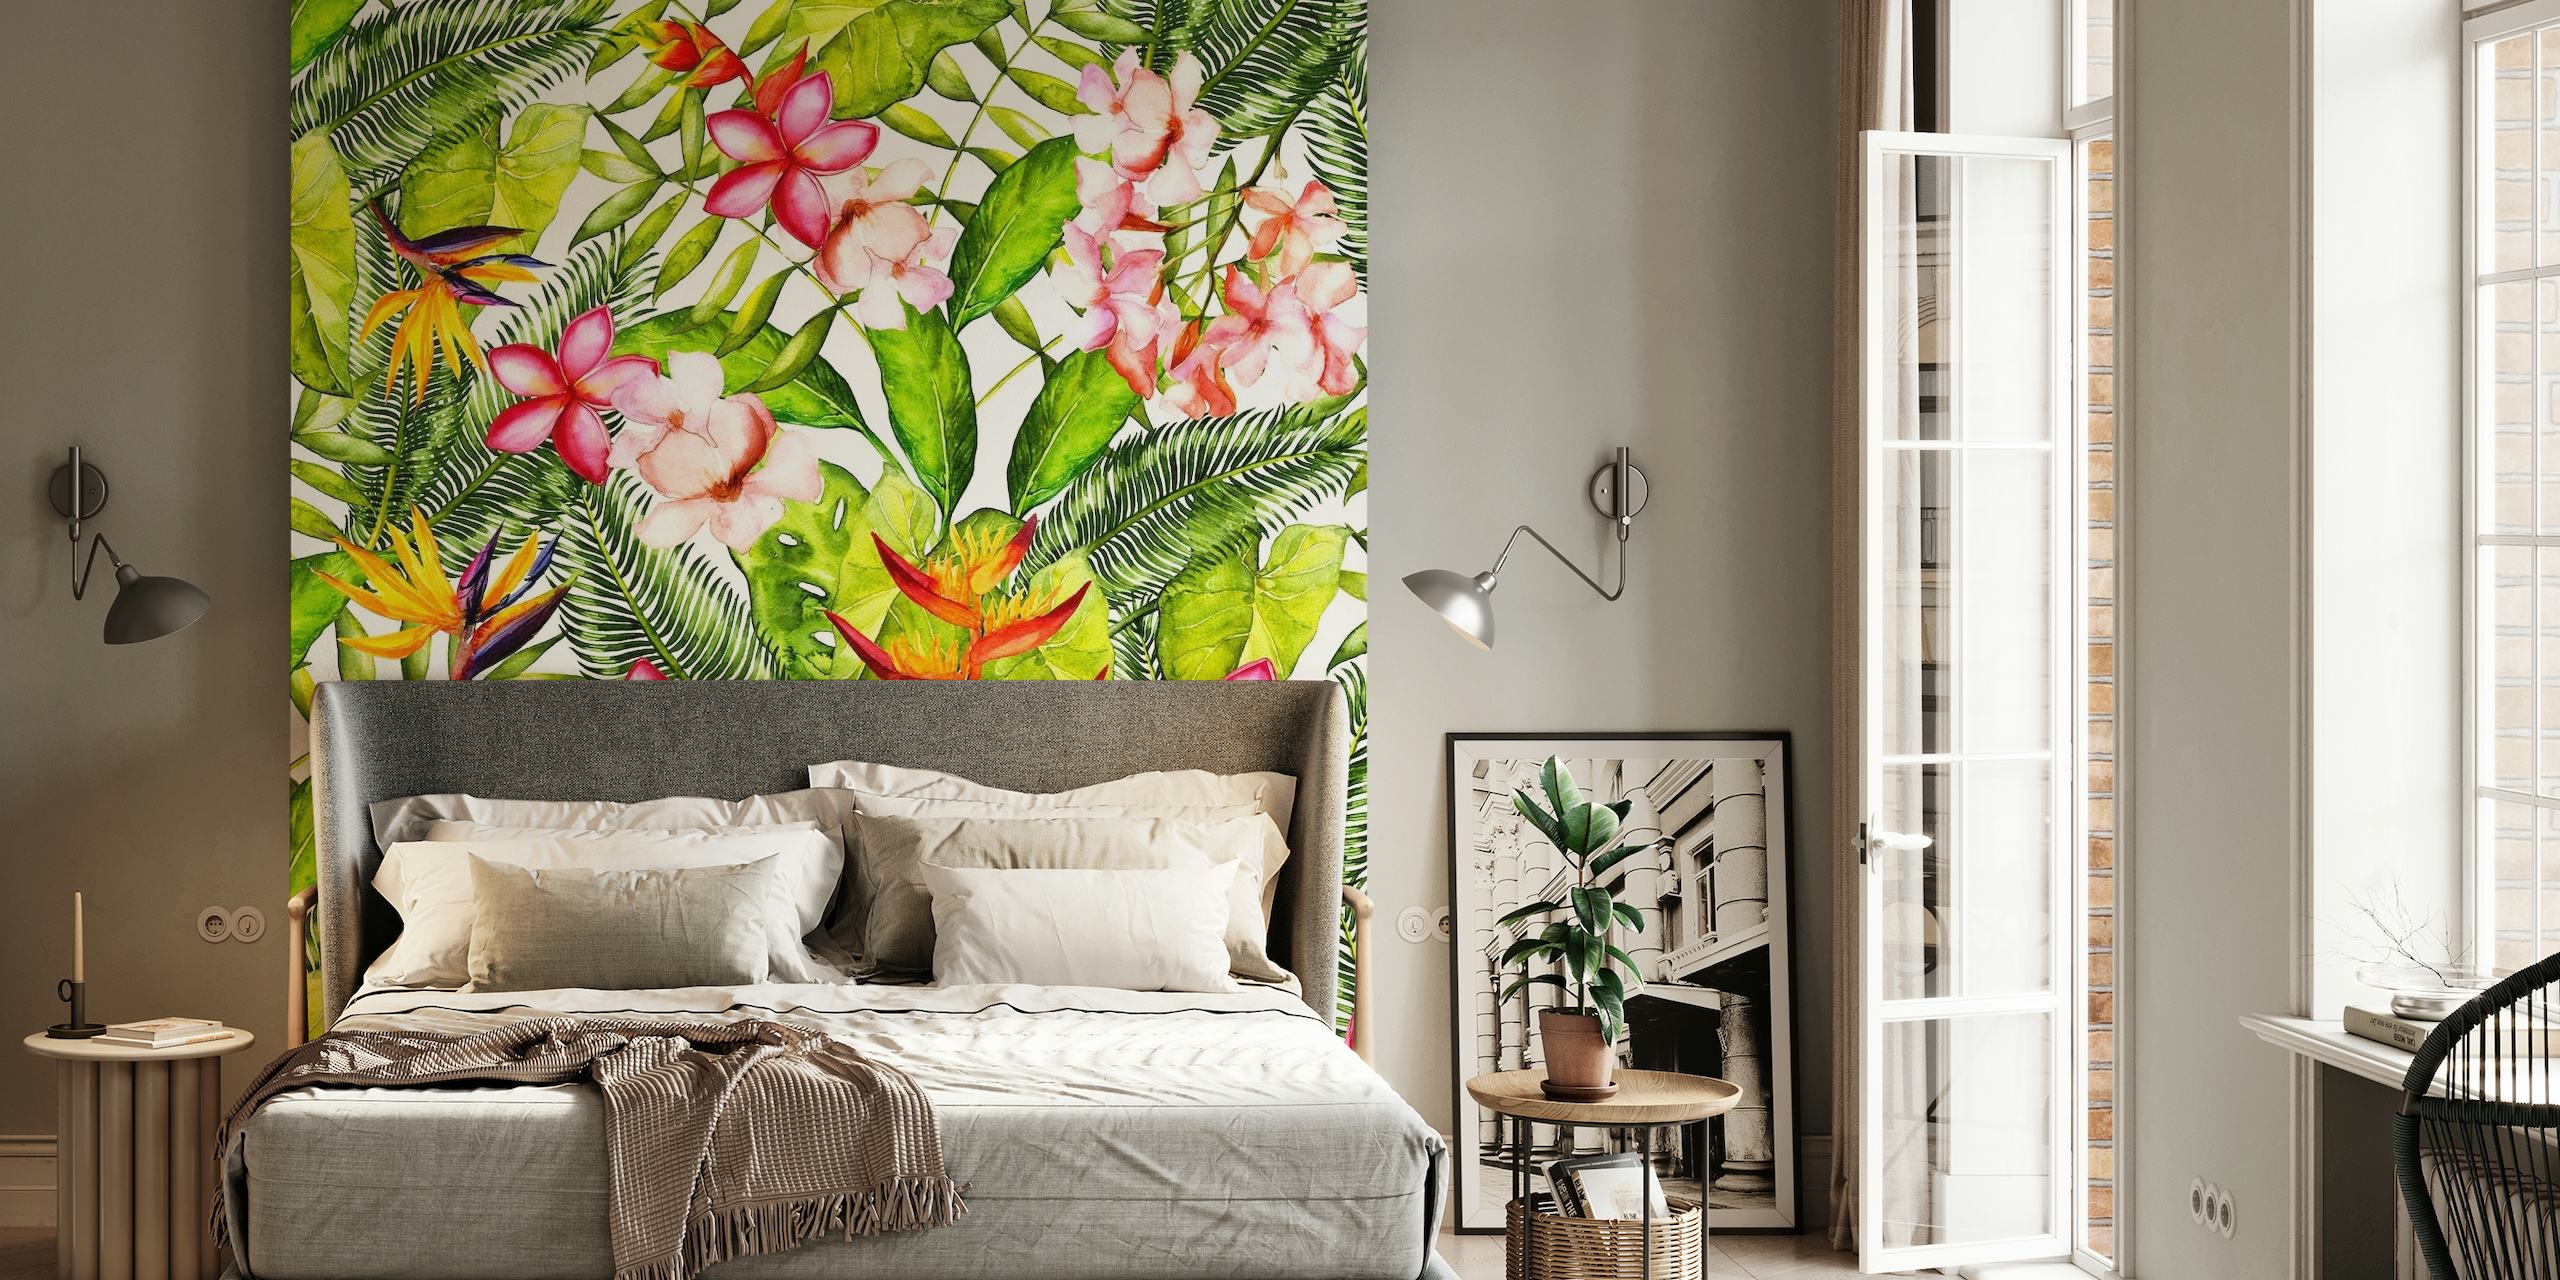 Plumeria and Tropical Jungle Flowers wall mural with lush greenery and pink blossoms